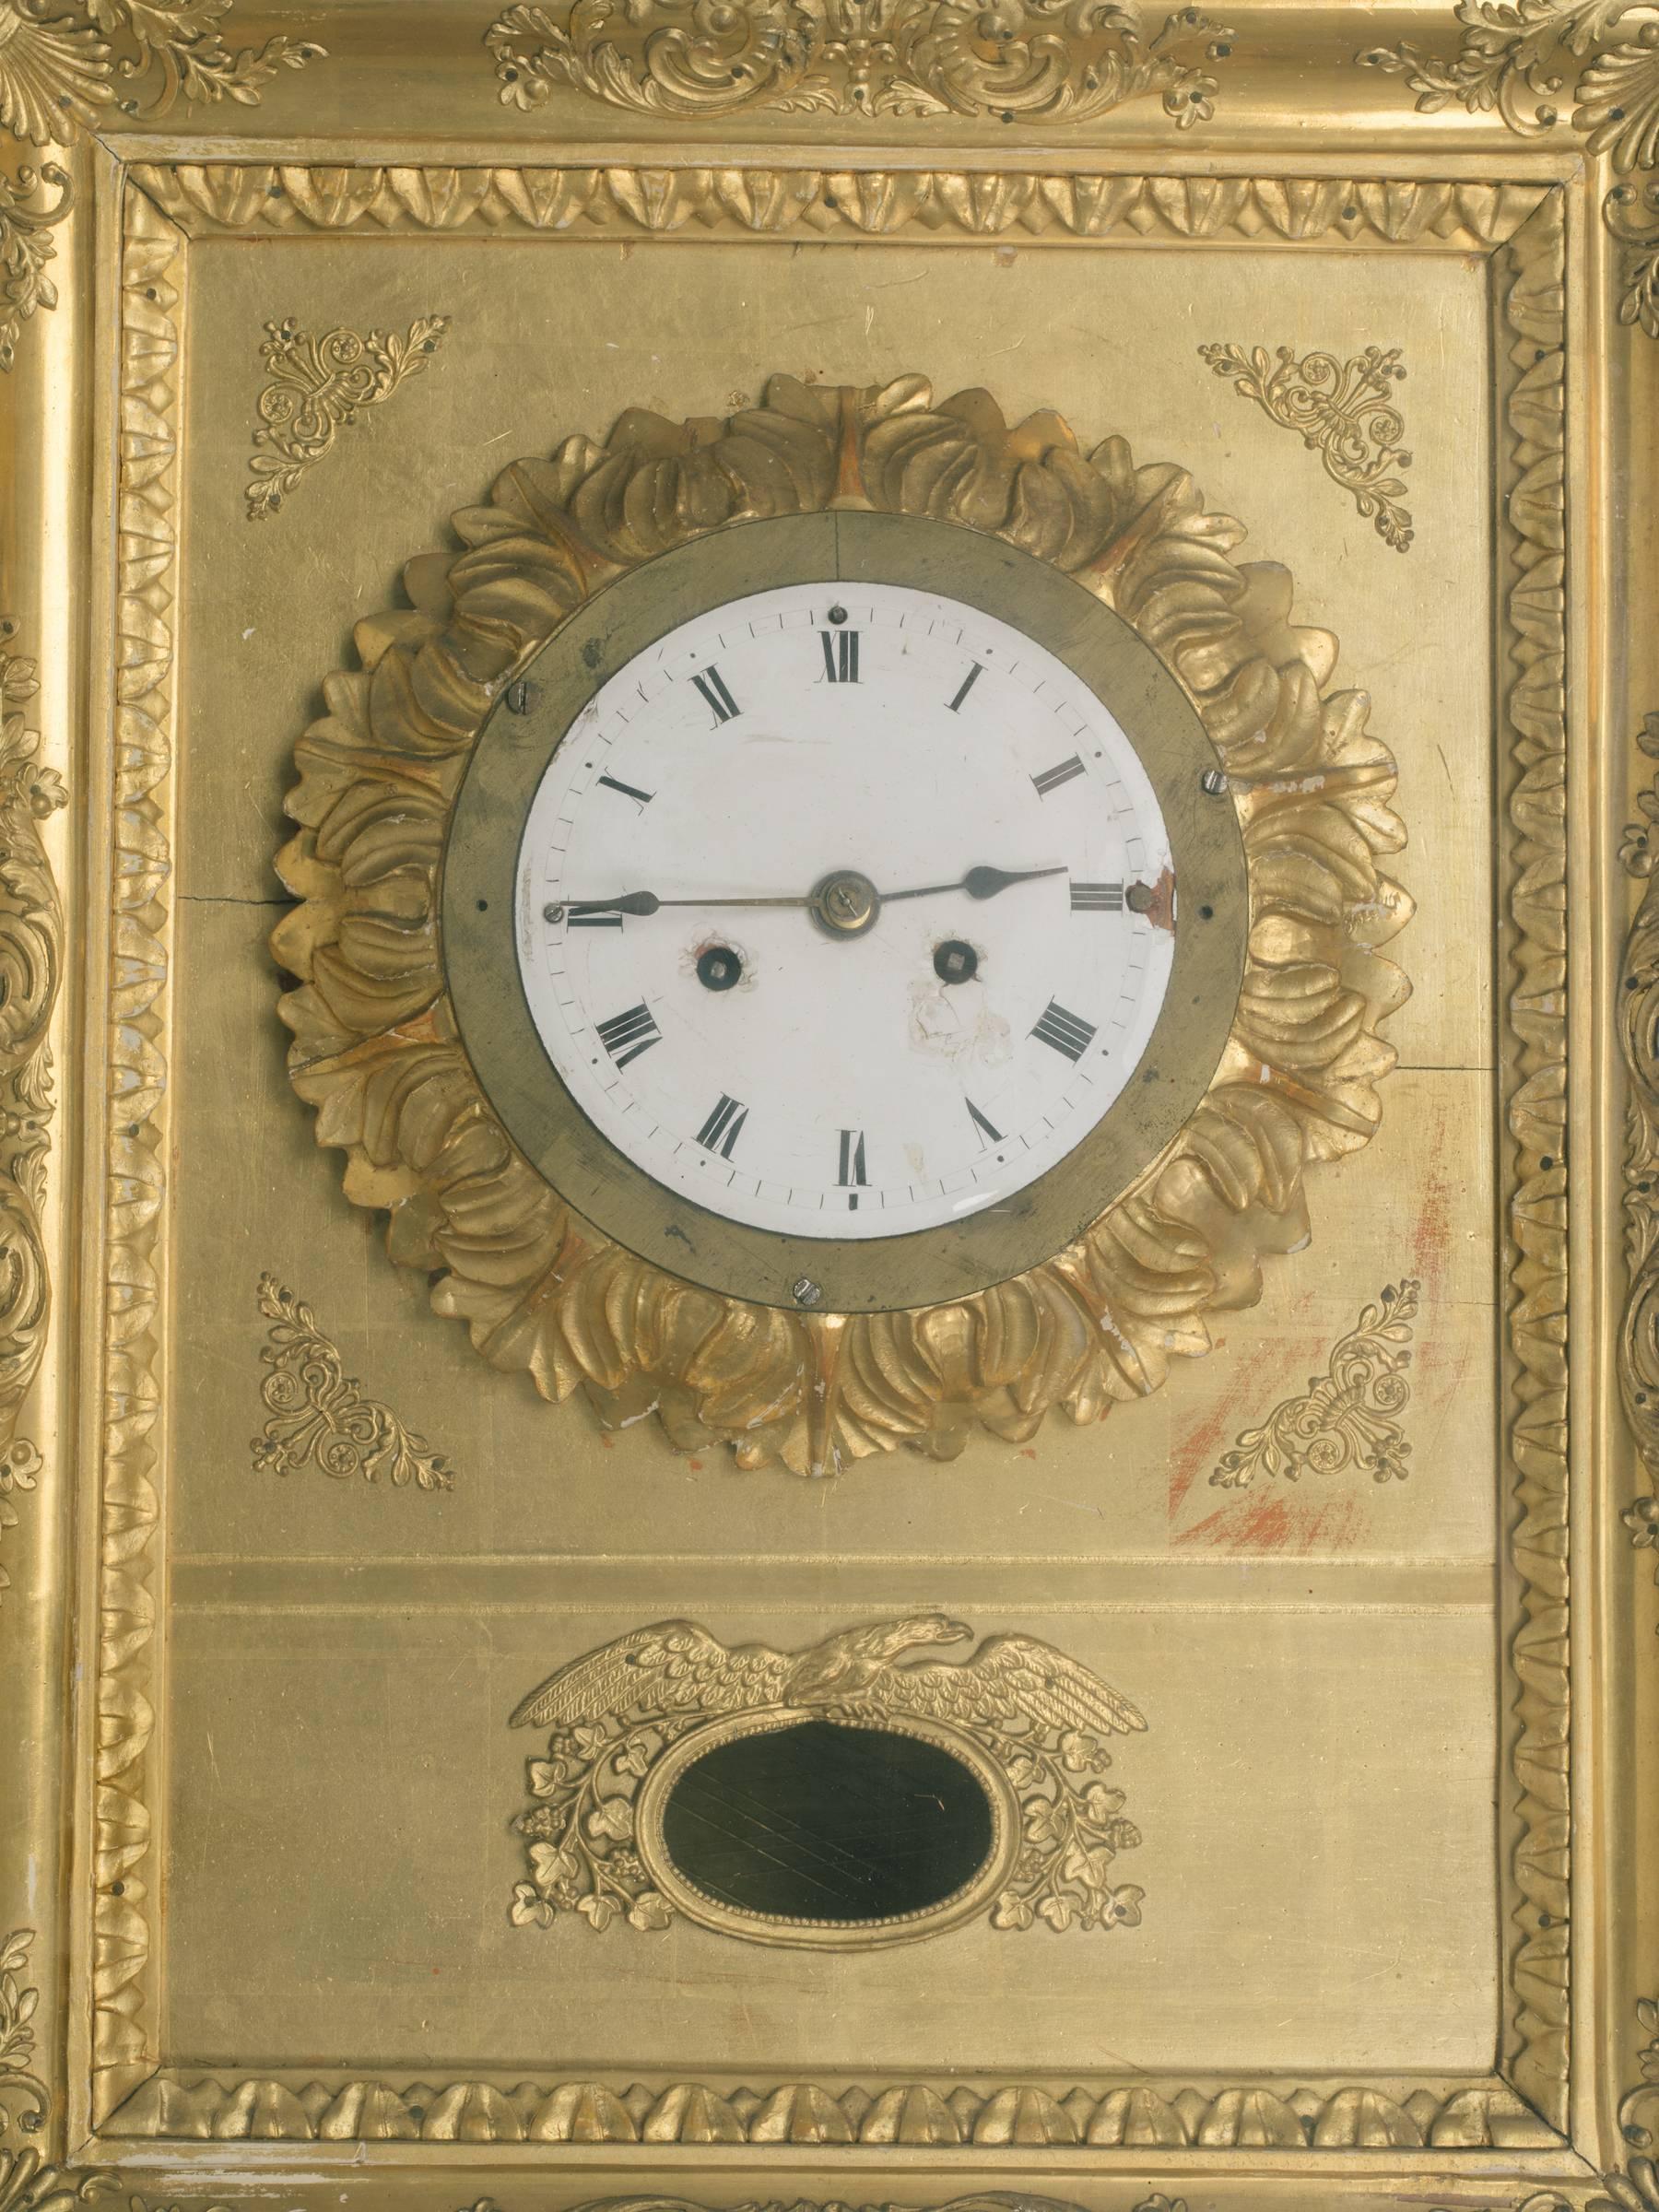 19th century French gilt wall clock. There is a brass pendulum that comes with this clock, but it was unfortunately not photographed . It was found after the clock was photographed. The clock does not work, there is no key. But it sure is pretty!